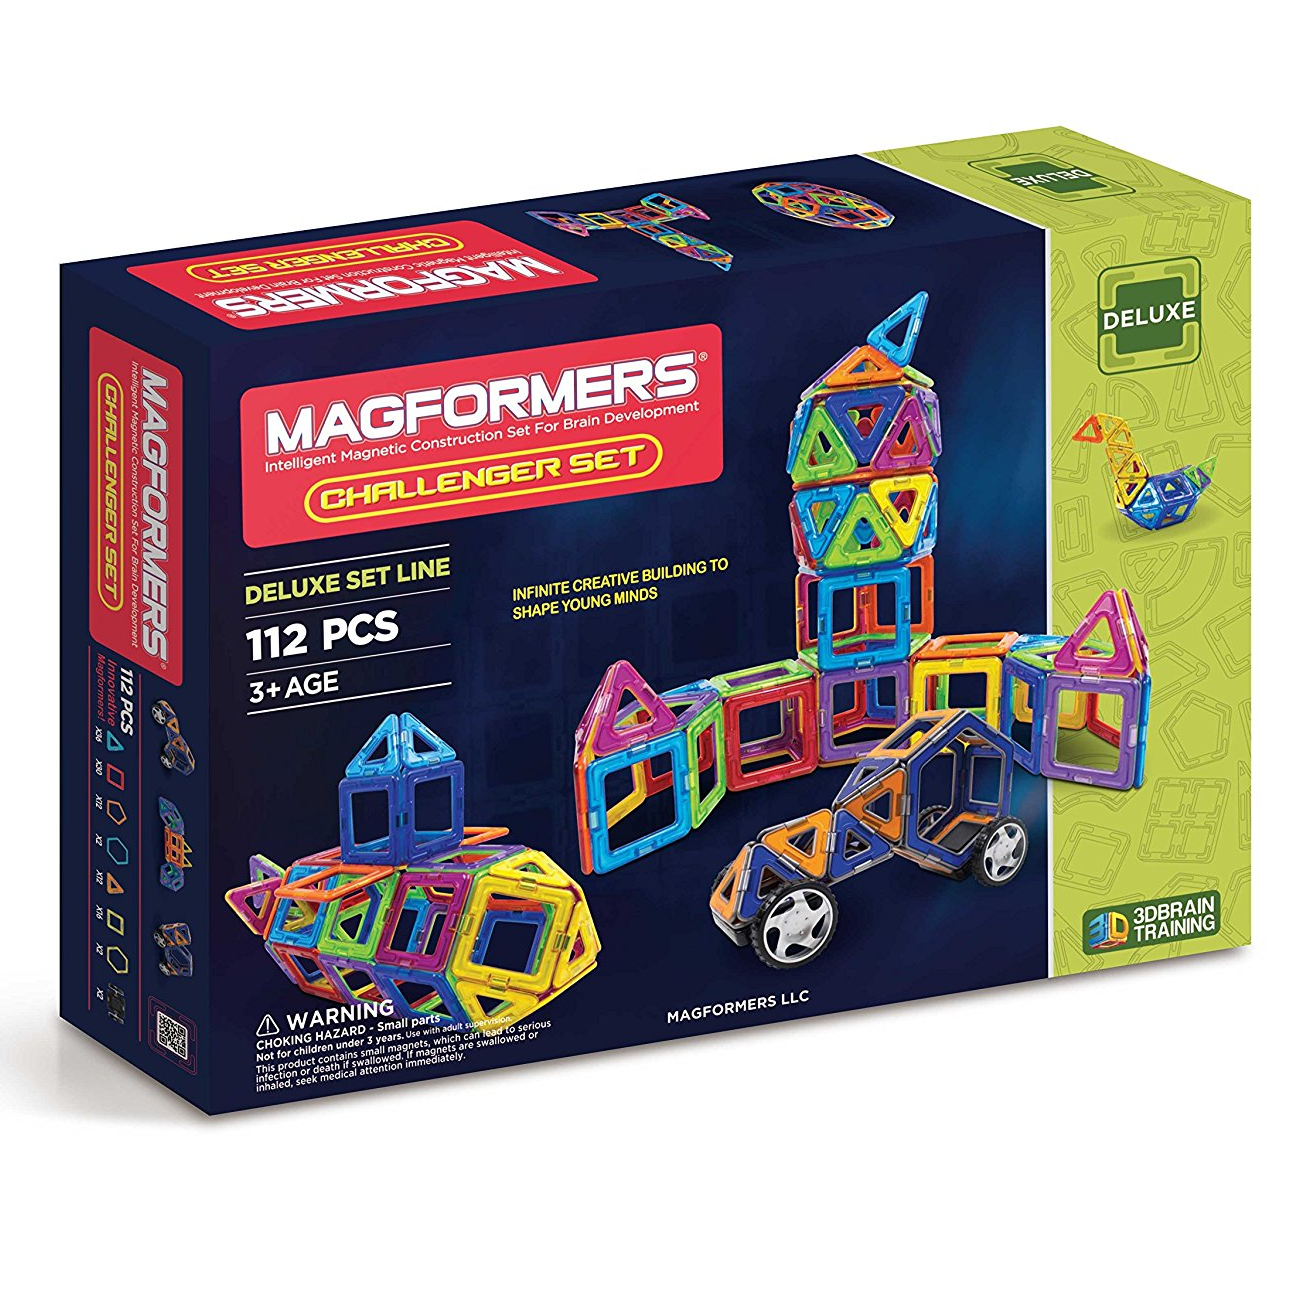 Magformers Challenger Set (112-pieces) Only $78.99 Shipped – BEST PRICE WE’VE SEEN!